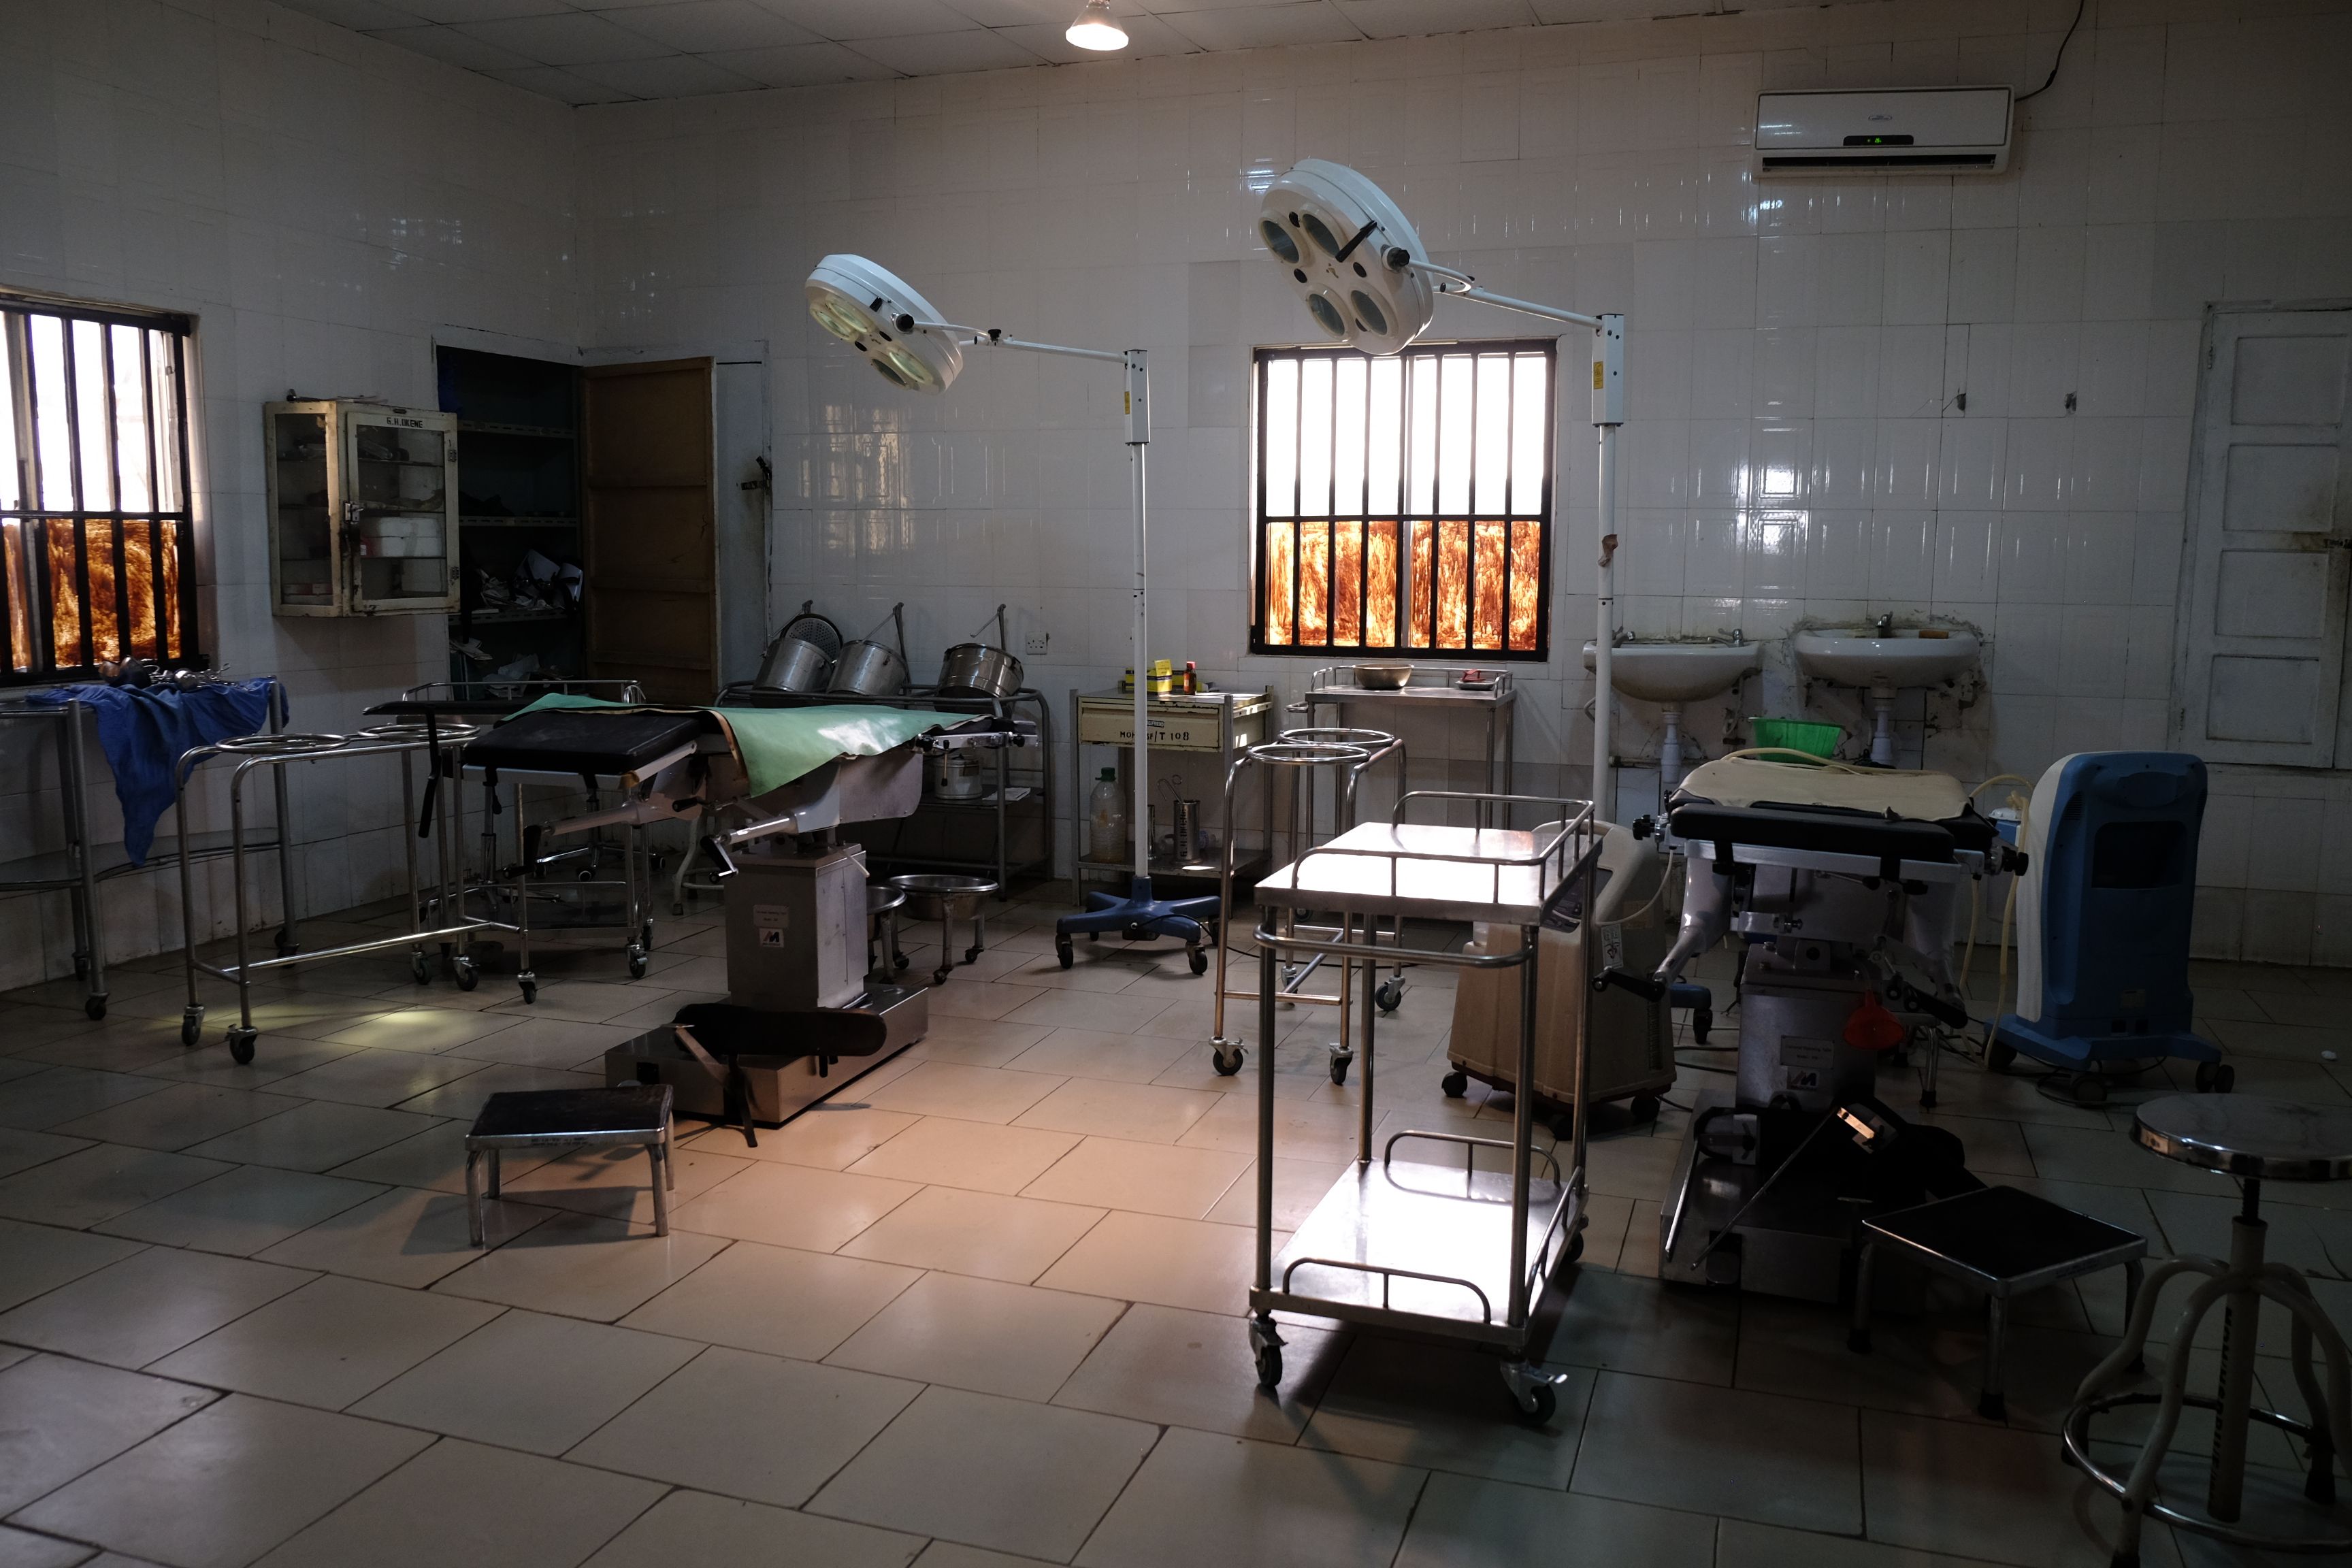 The operating theater at the Okene Zonal Hospital in Kogi State, Nigeria. Image by T.R. Goldman. Nigeria, 2017.